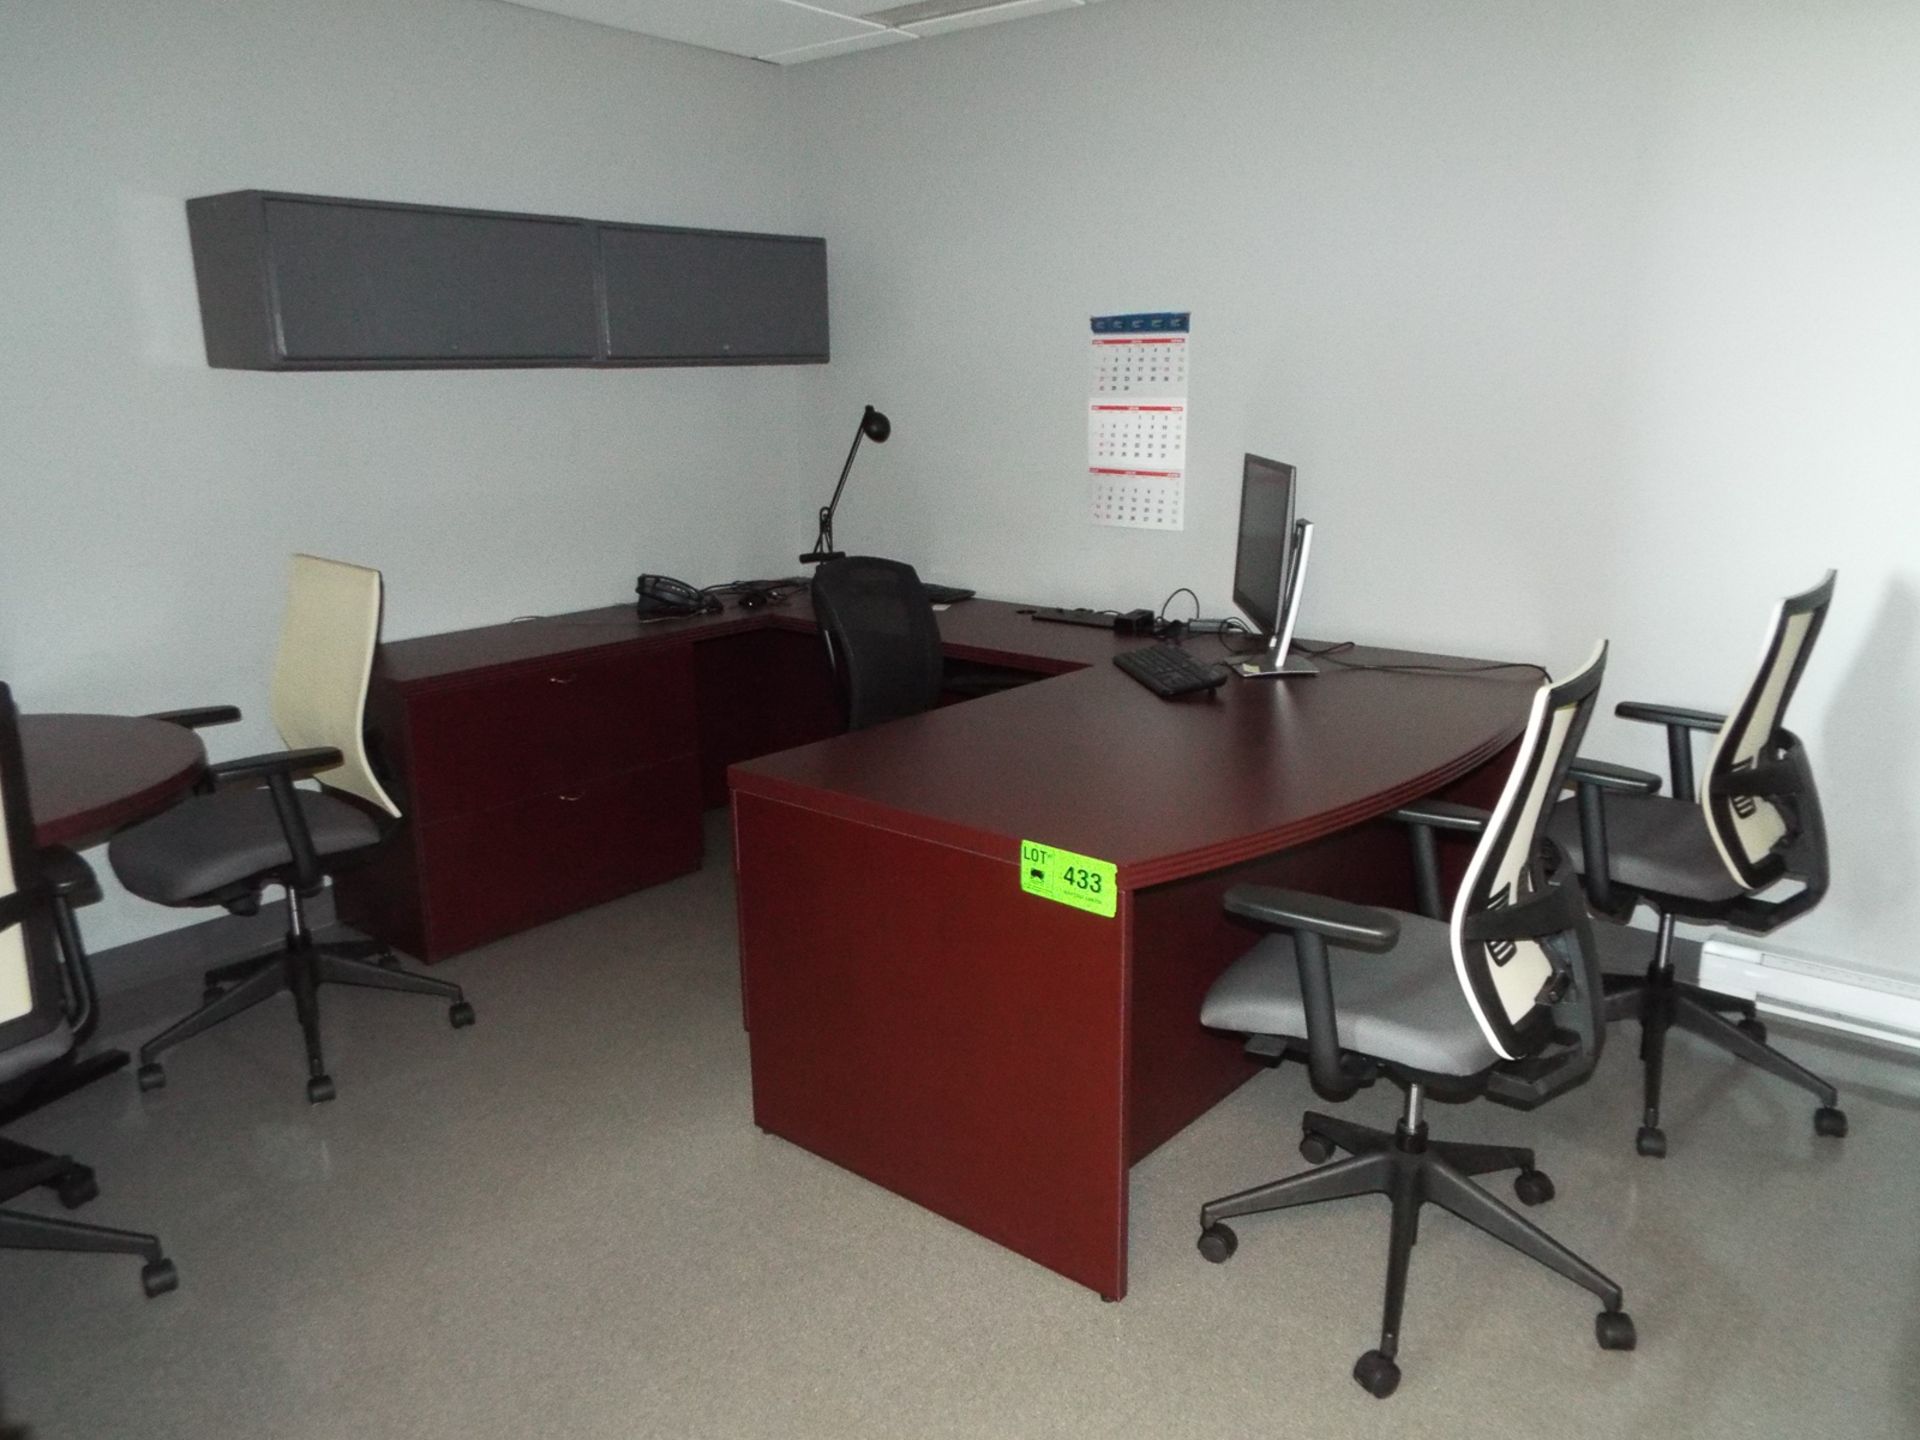 LOT/ CONTENTS OF OFFICE (FURNITURE ONLY) - U-SHAPED DESK WITH OVERHEAD CABINETS, OFFICE CHAIRS AND